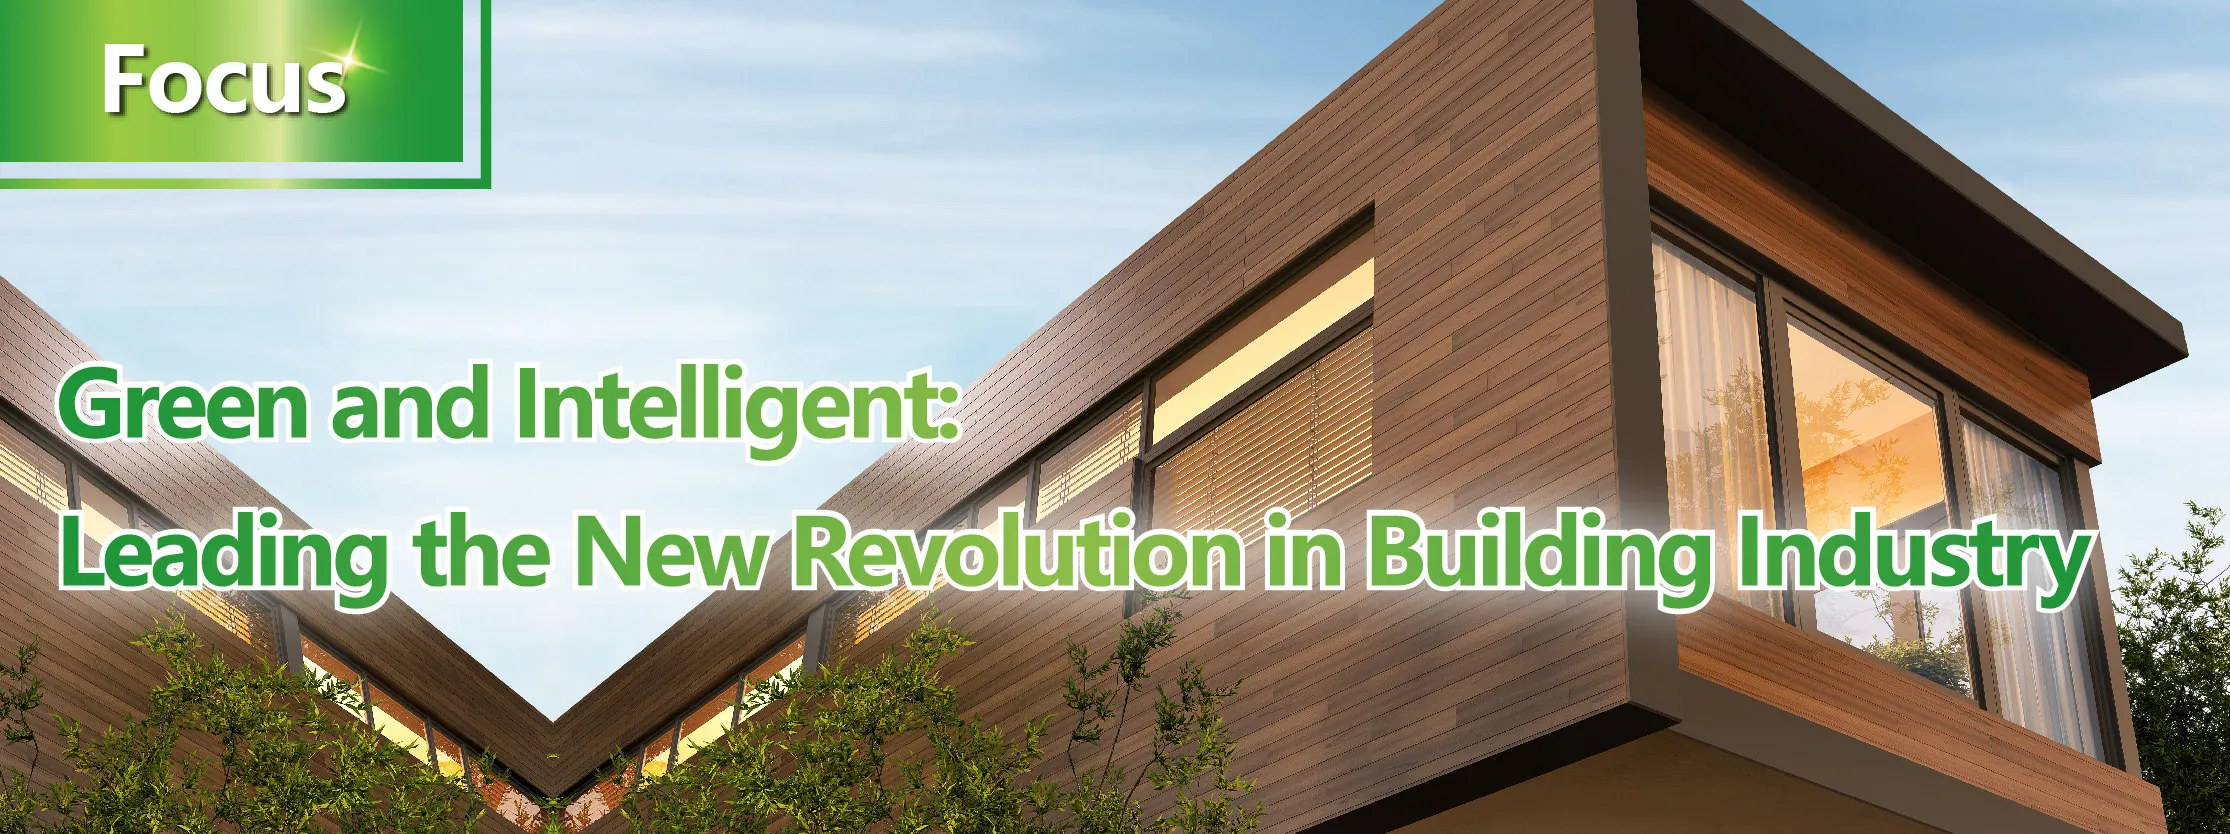 Green and Intelligent: Leading the New Revolution in Building Industry